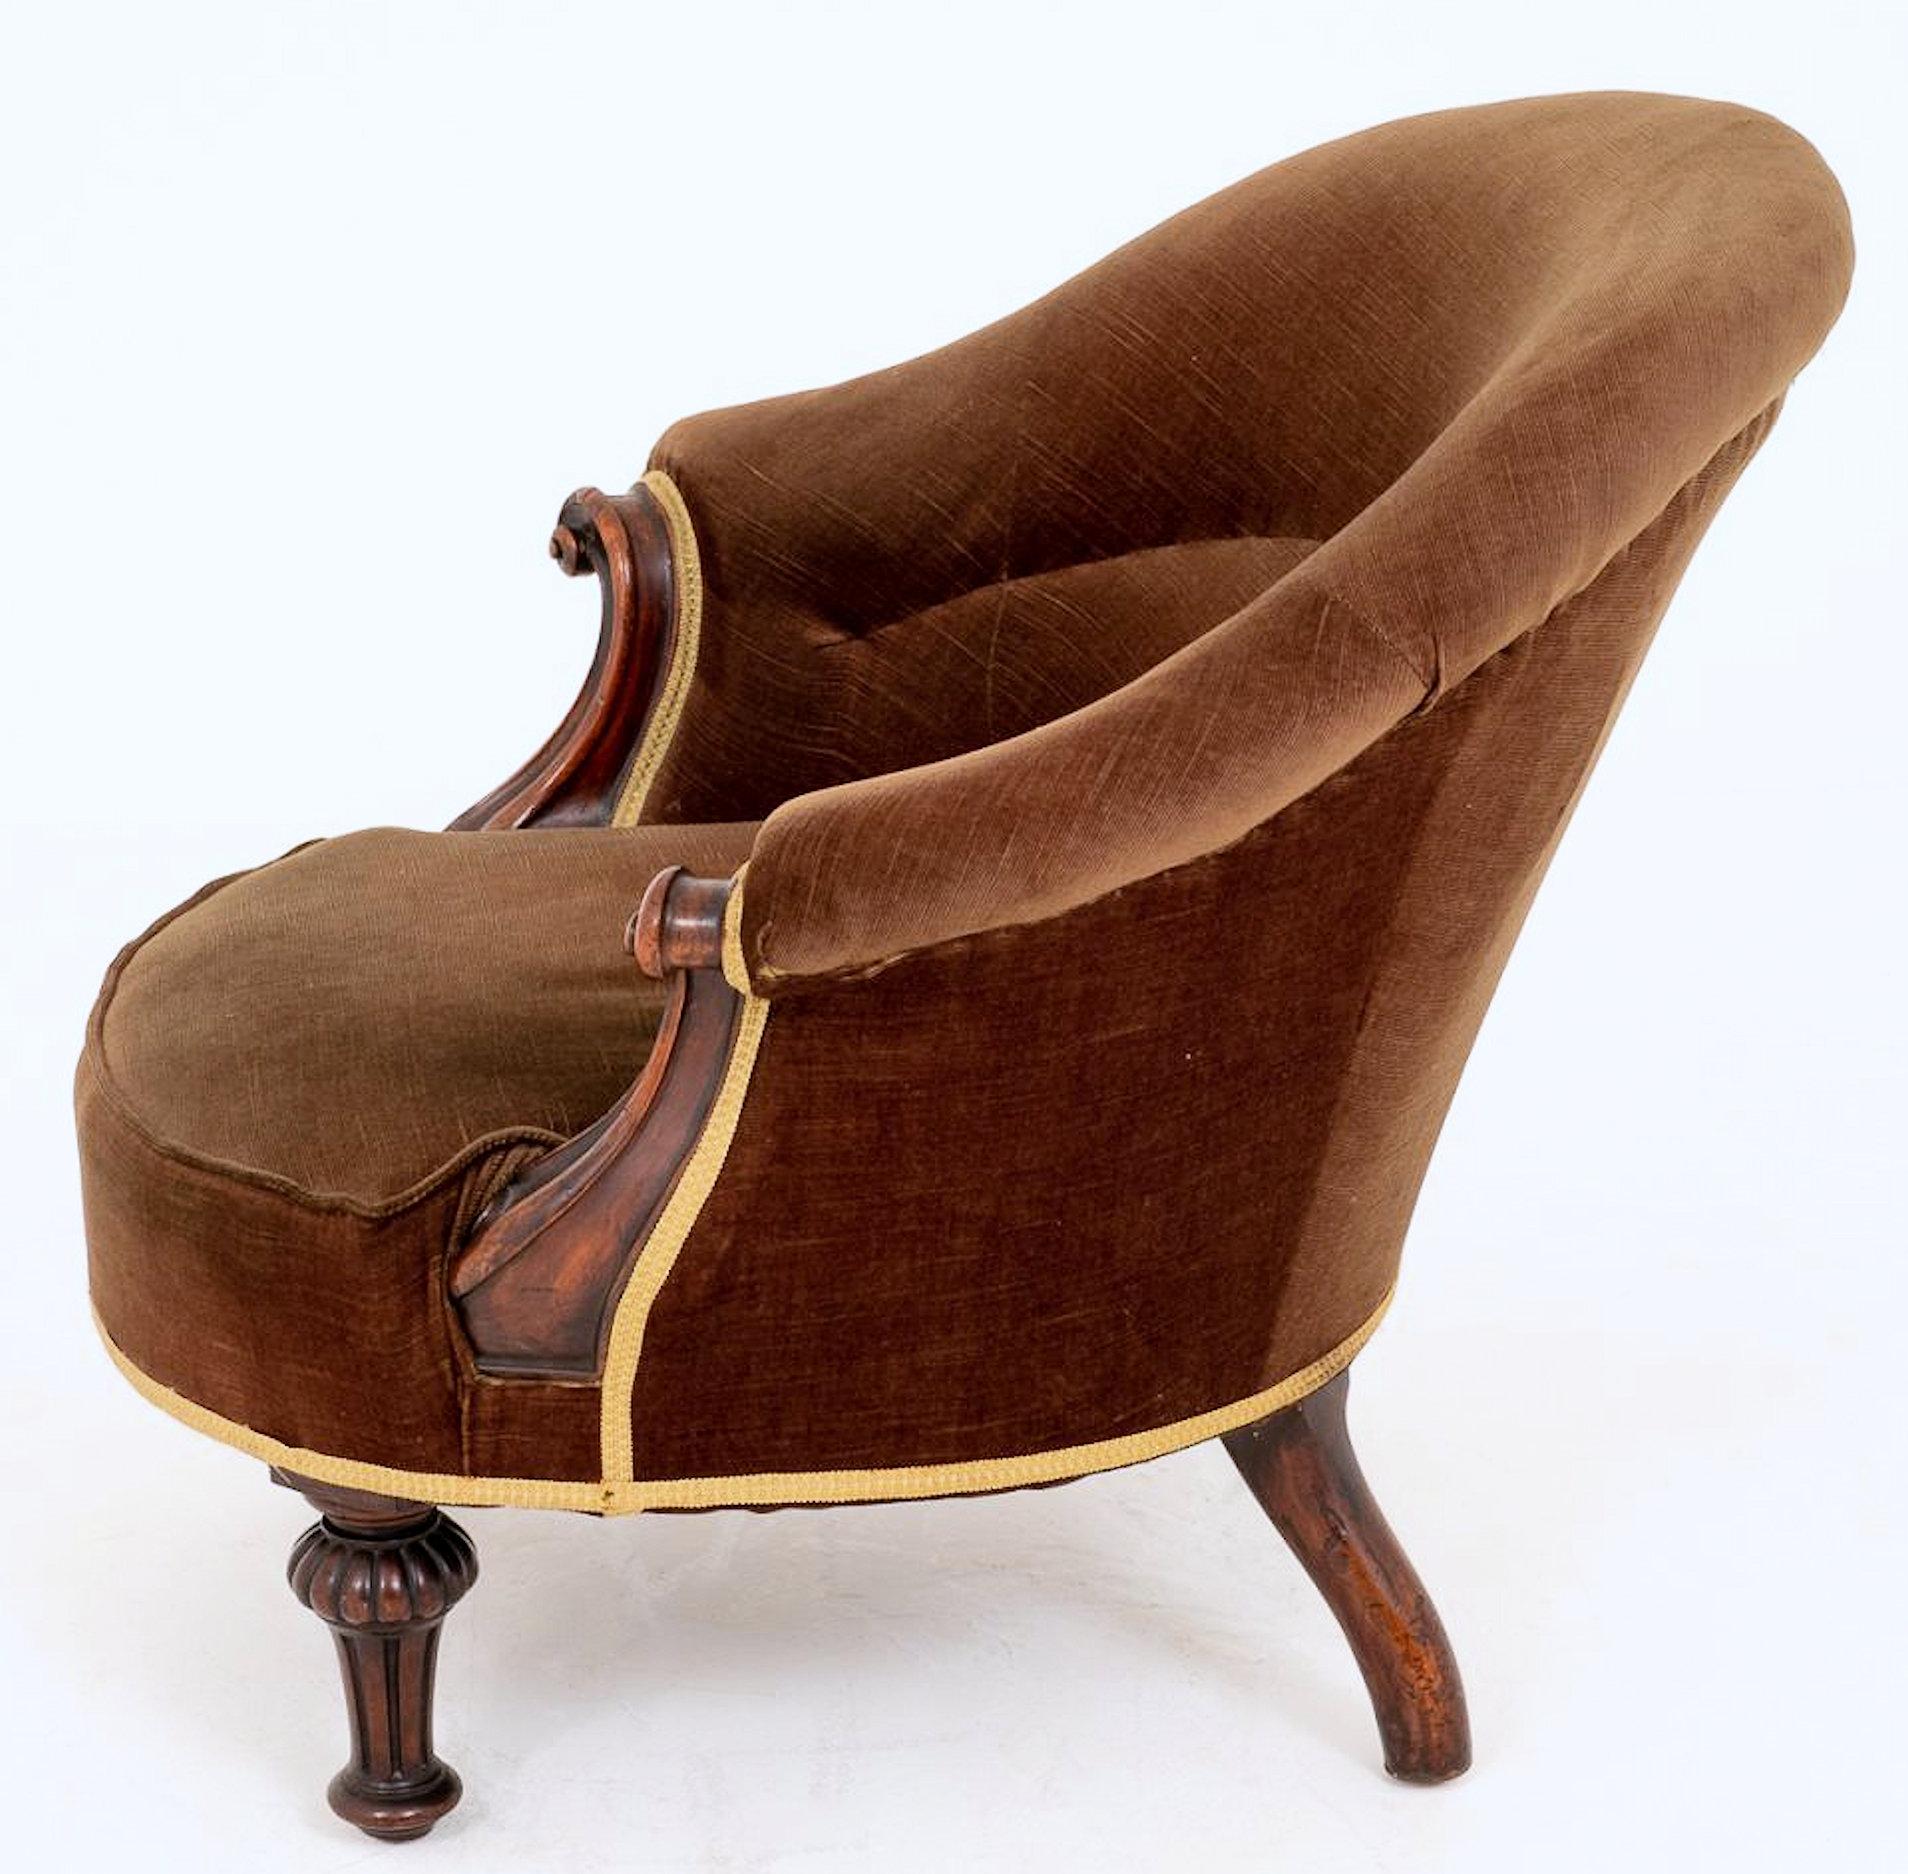 Victorian 19th Century English Upholstered Tub Chair